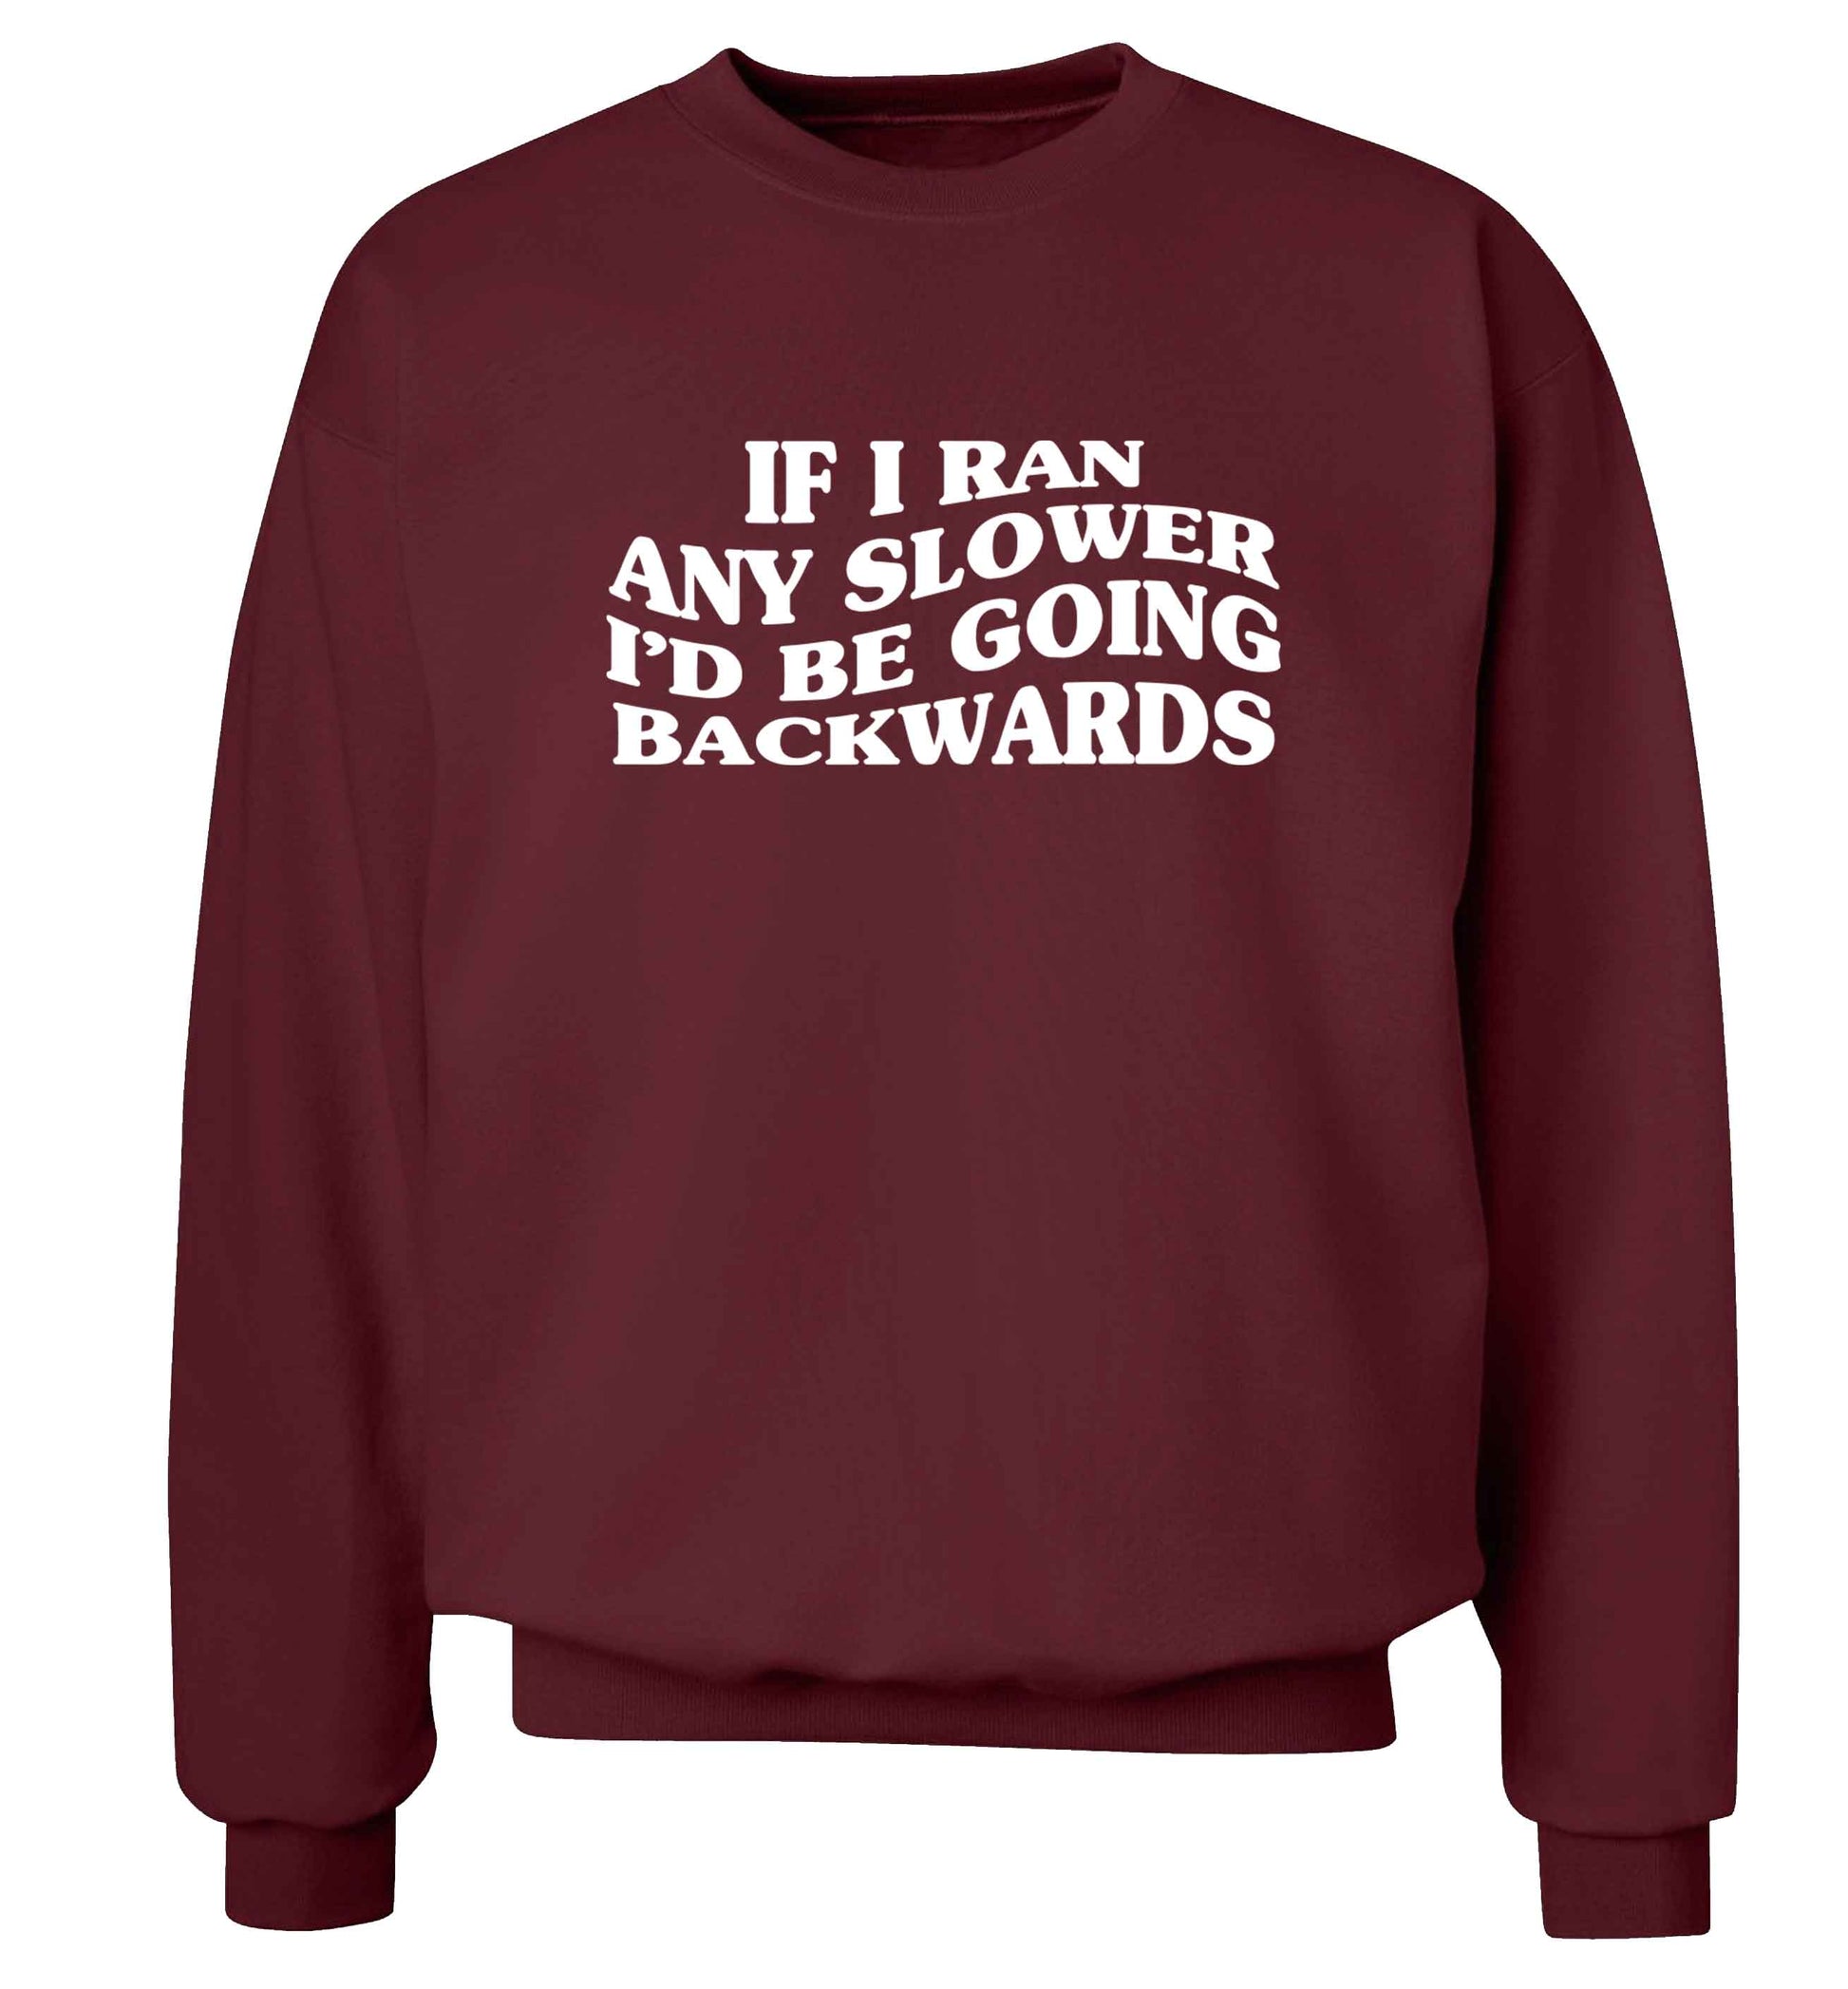 If I ran any slower I'd be going backwards adult's unisex maroon sweater 2XL